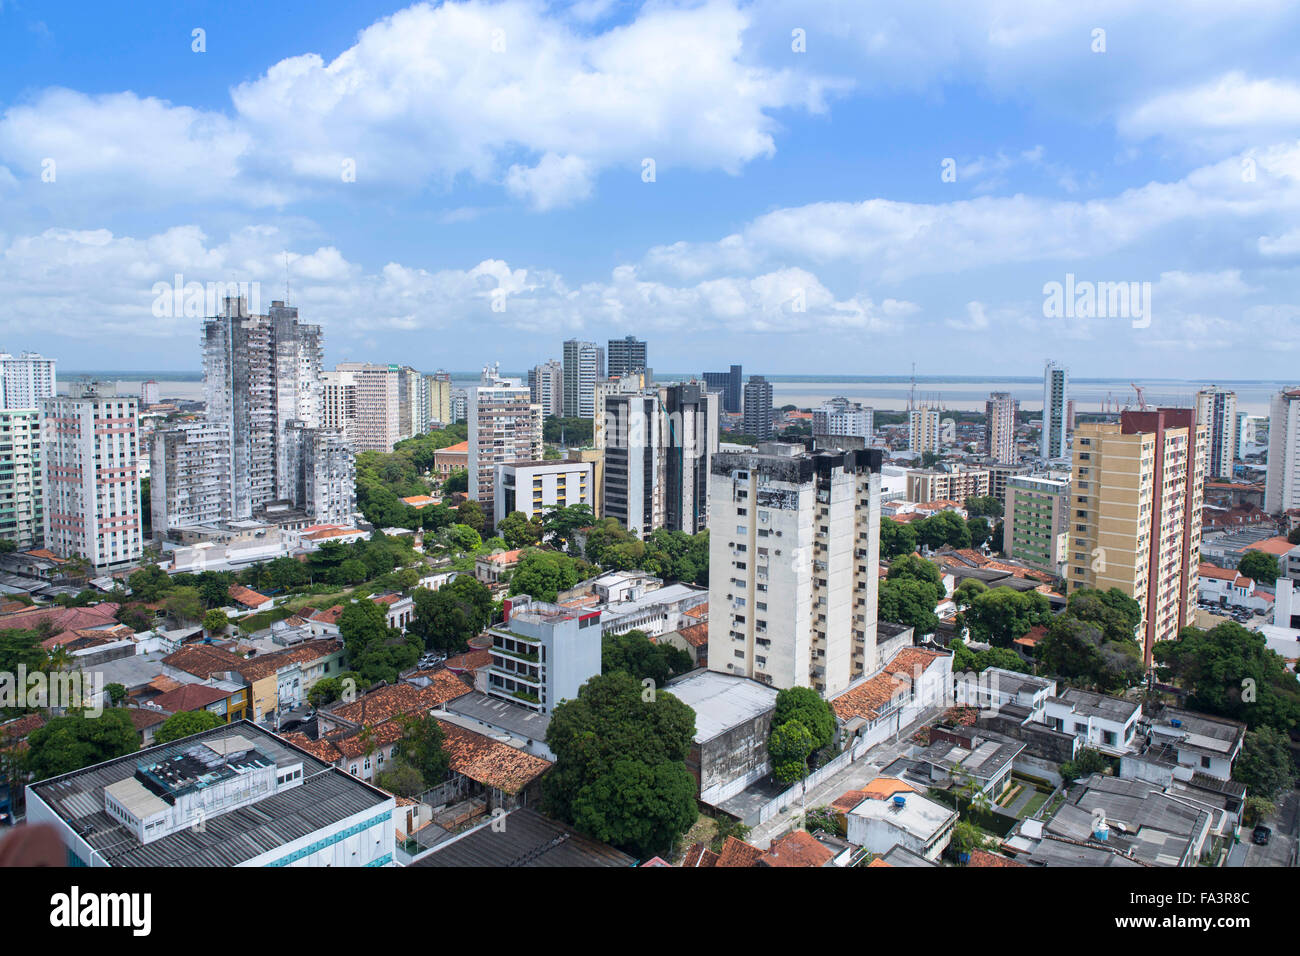 General view of the Belem city center skyline showing residential apartment blocks, Para state, Brazilian Amazon, Brazil, South America Stock Photo